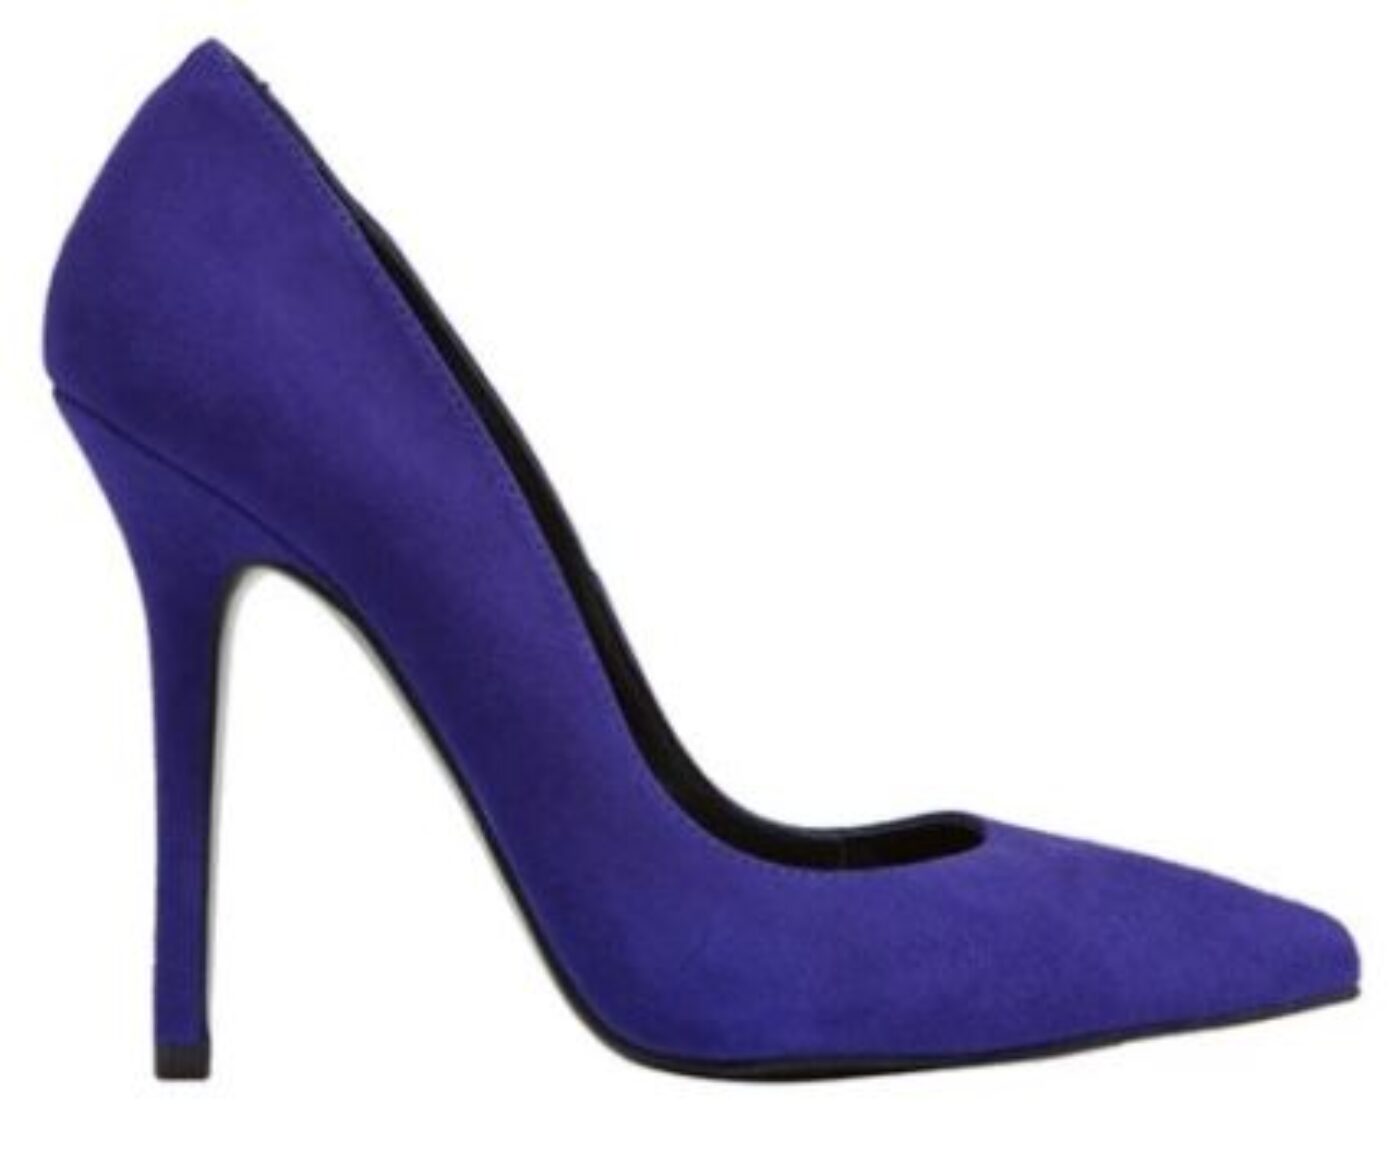 Why Wine Colored Heels Make Women More Attractive